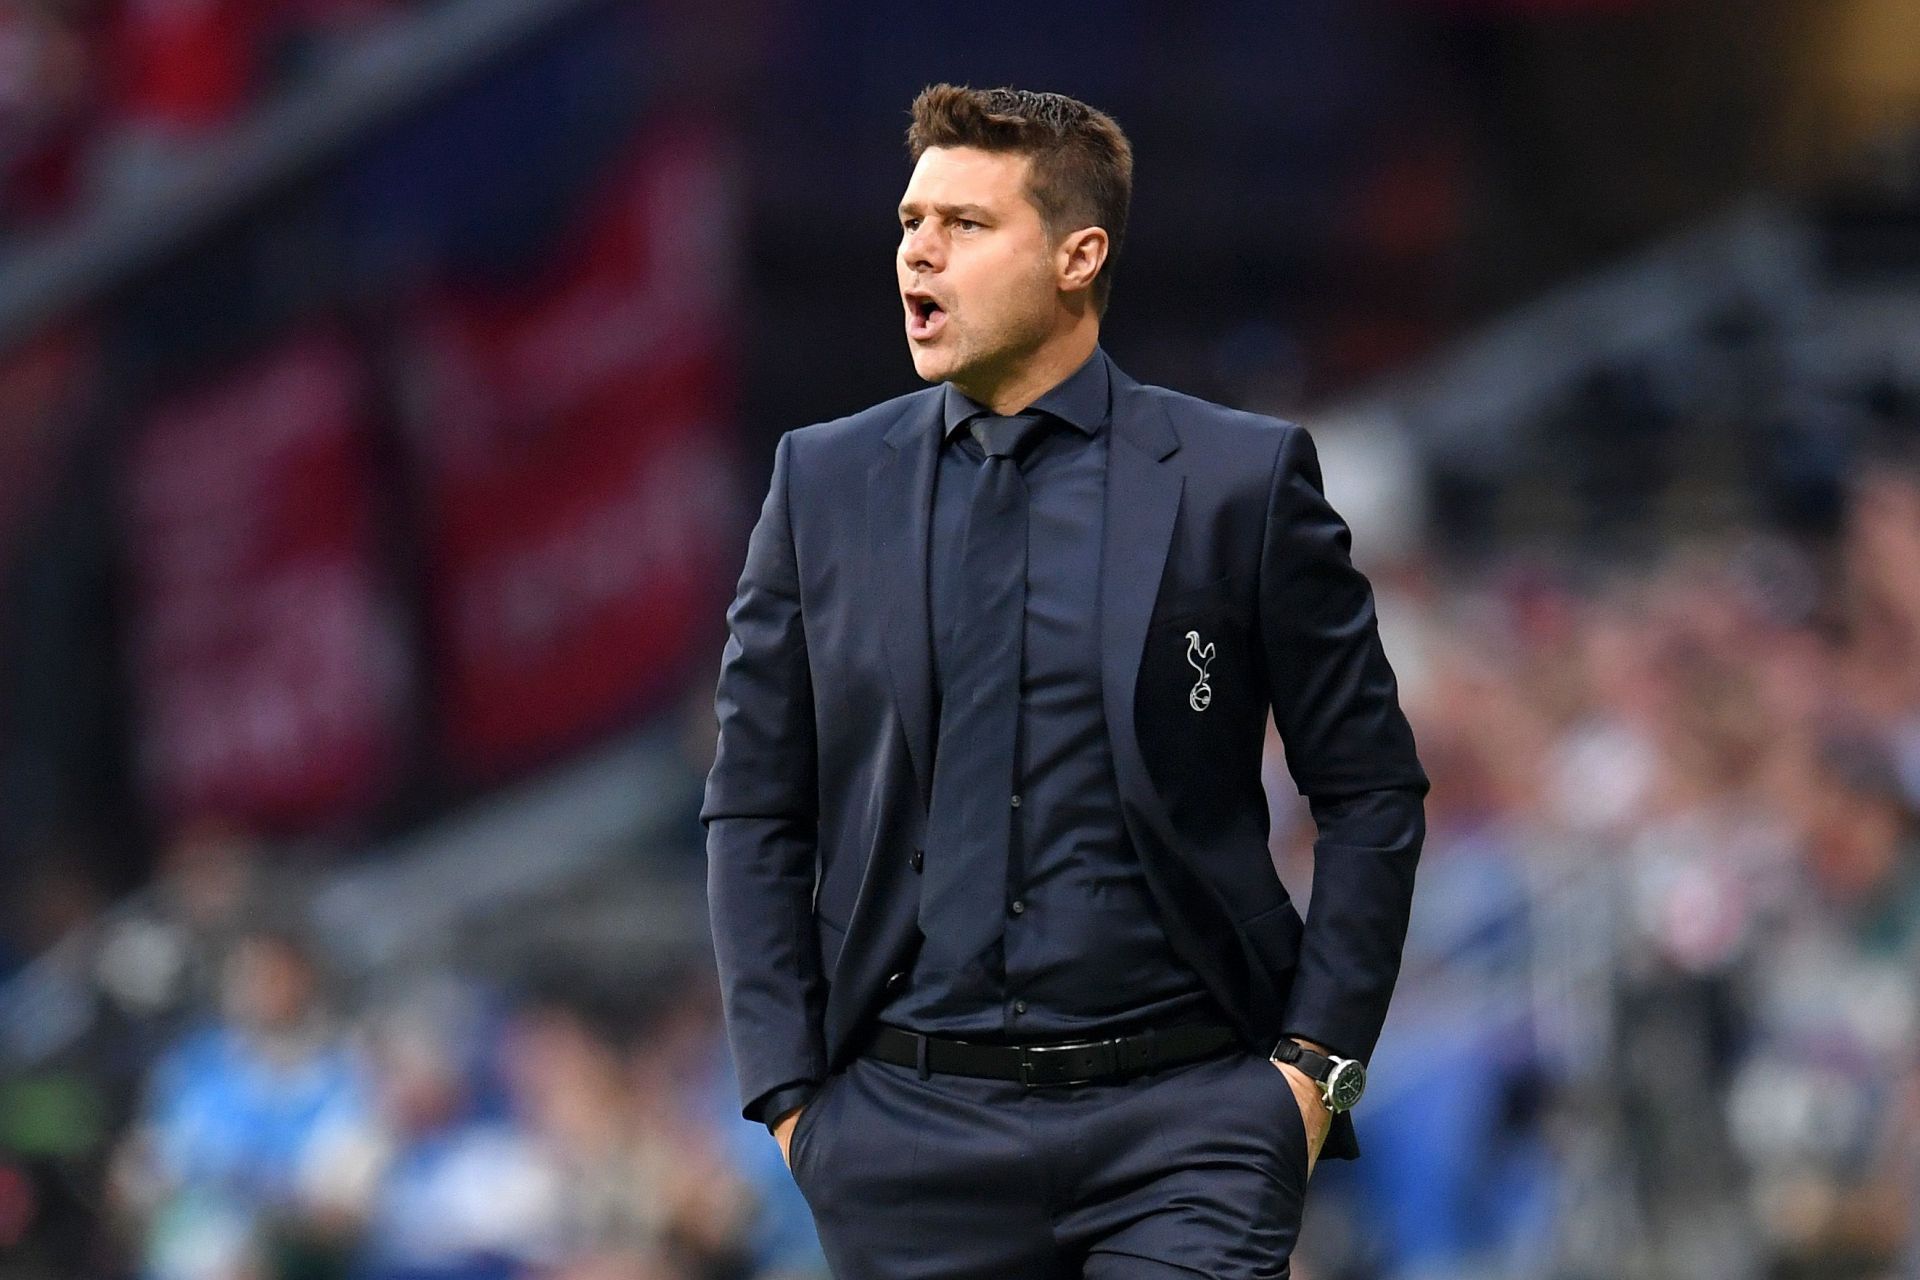 Mauricio Pochettino had a successful time with Southamption in the EPL